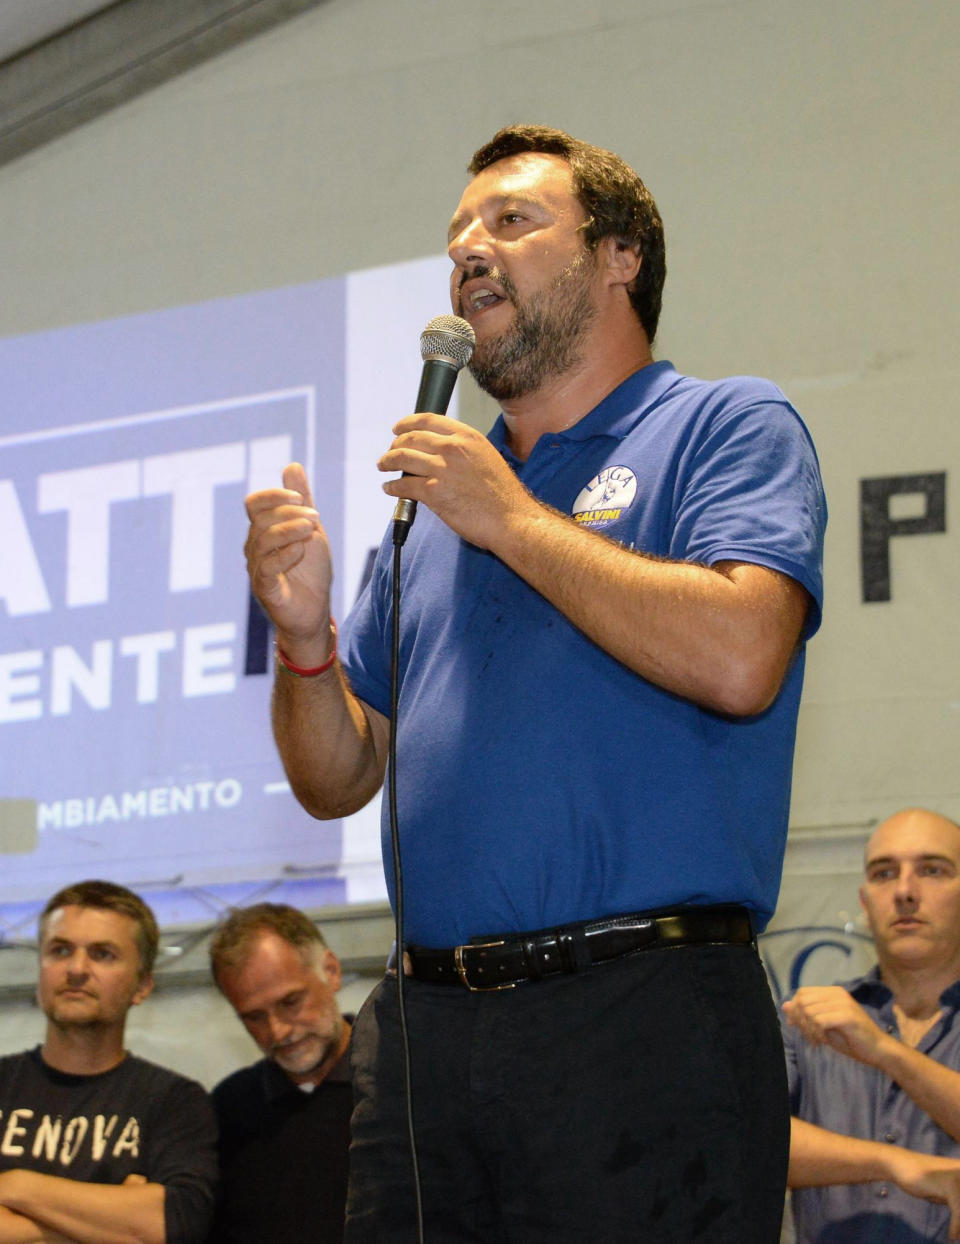 Italian Deputy Premier and Interior Minister, Matteo Salvini, speaks at a Lega party's meeting in Pinzolo, Italy, Saturday, Aug. 25, 2018. Italian state TV says Italy's interior minister is being investigated for his role in forbidding migrants rescued at sea to disembark. Minister Matteo Salvini indirectly confirmed the report Saturday, tweeting that a Sicilian prosecutor asked him for his data and that "if he wants to interrogate me or even arrest me because I defend the borders and security of my country, I'm proud." But Salvini said he'll soon allow the migrants he had kept on an Italian coast guard ship for days to leave. (Daniele Panato/ANSA via AP)